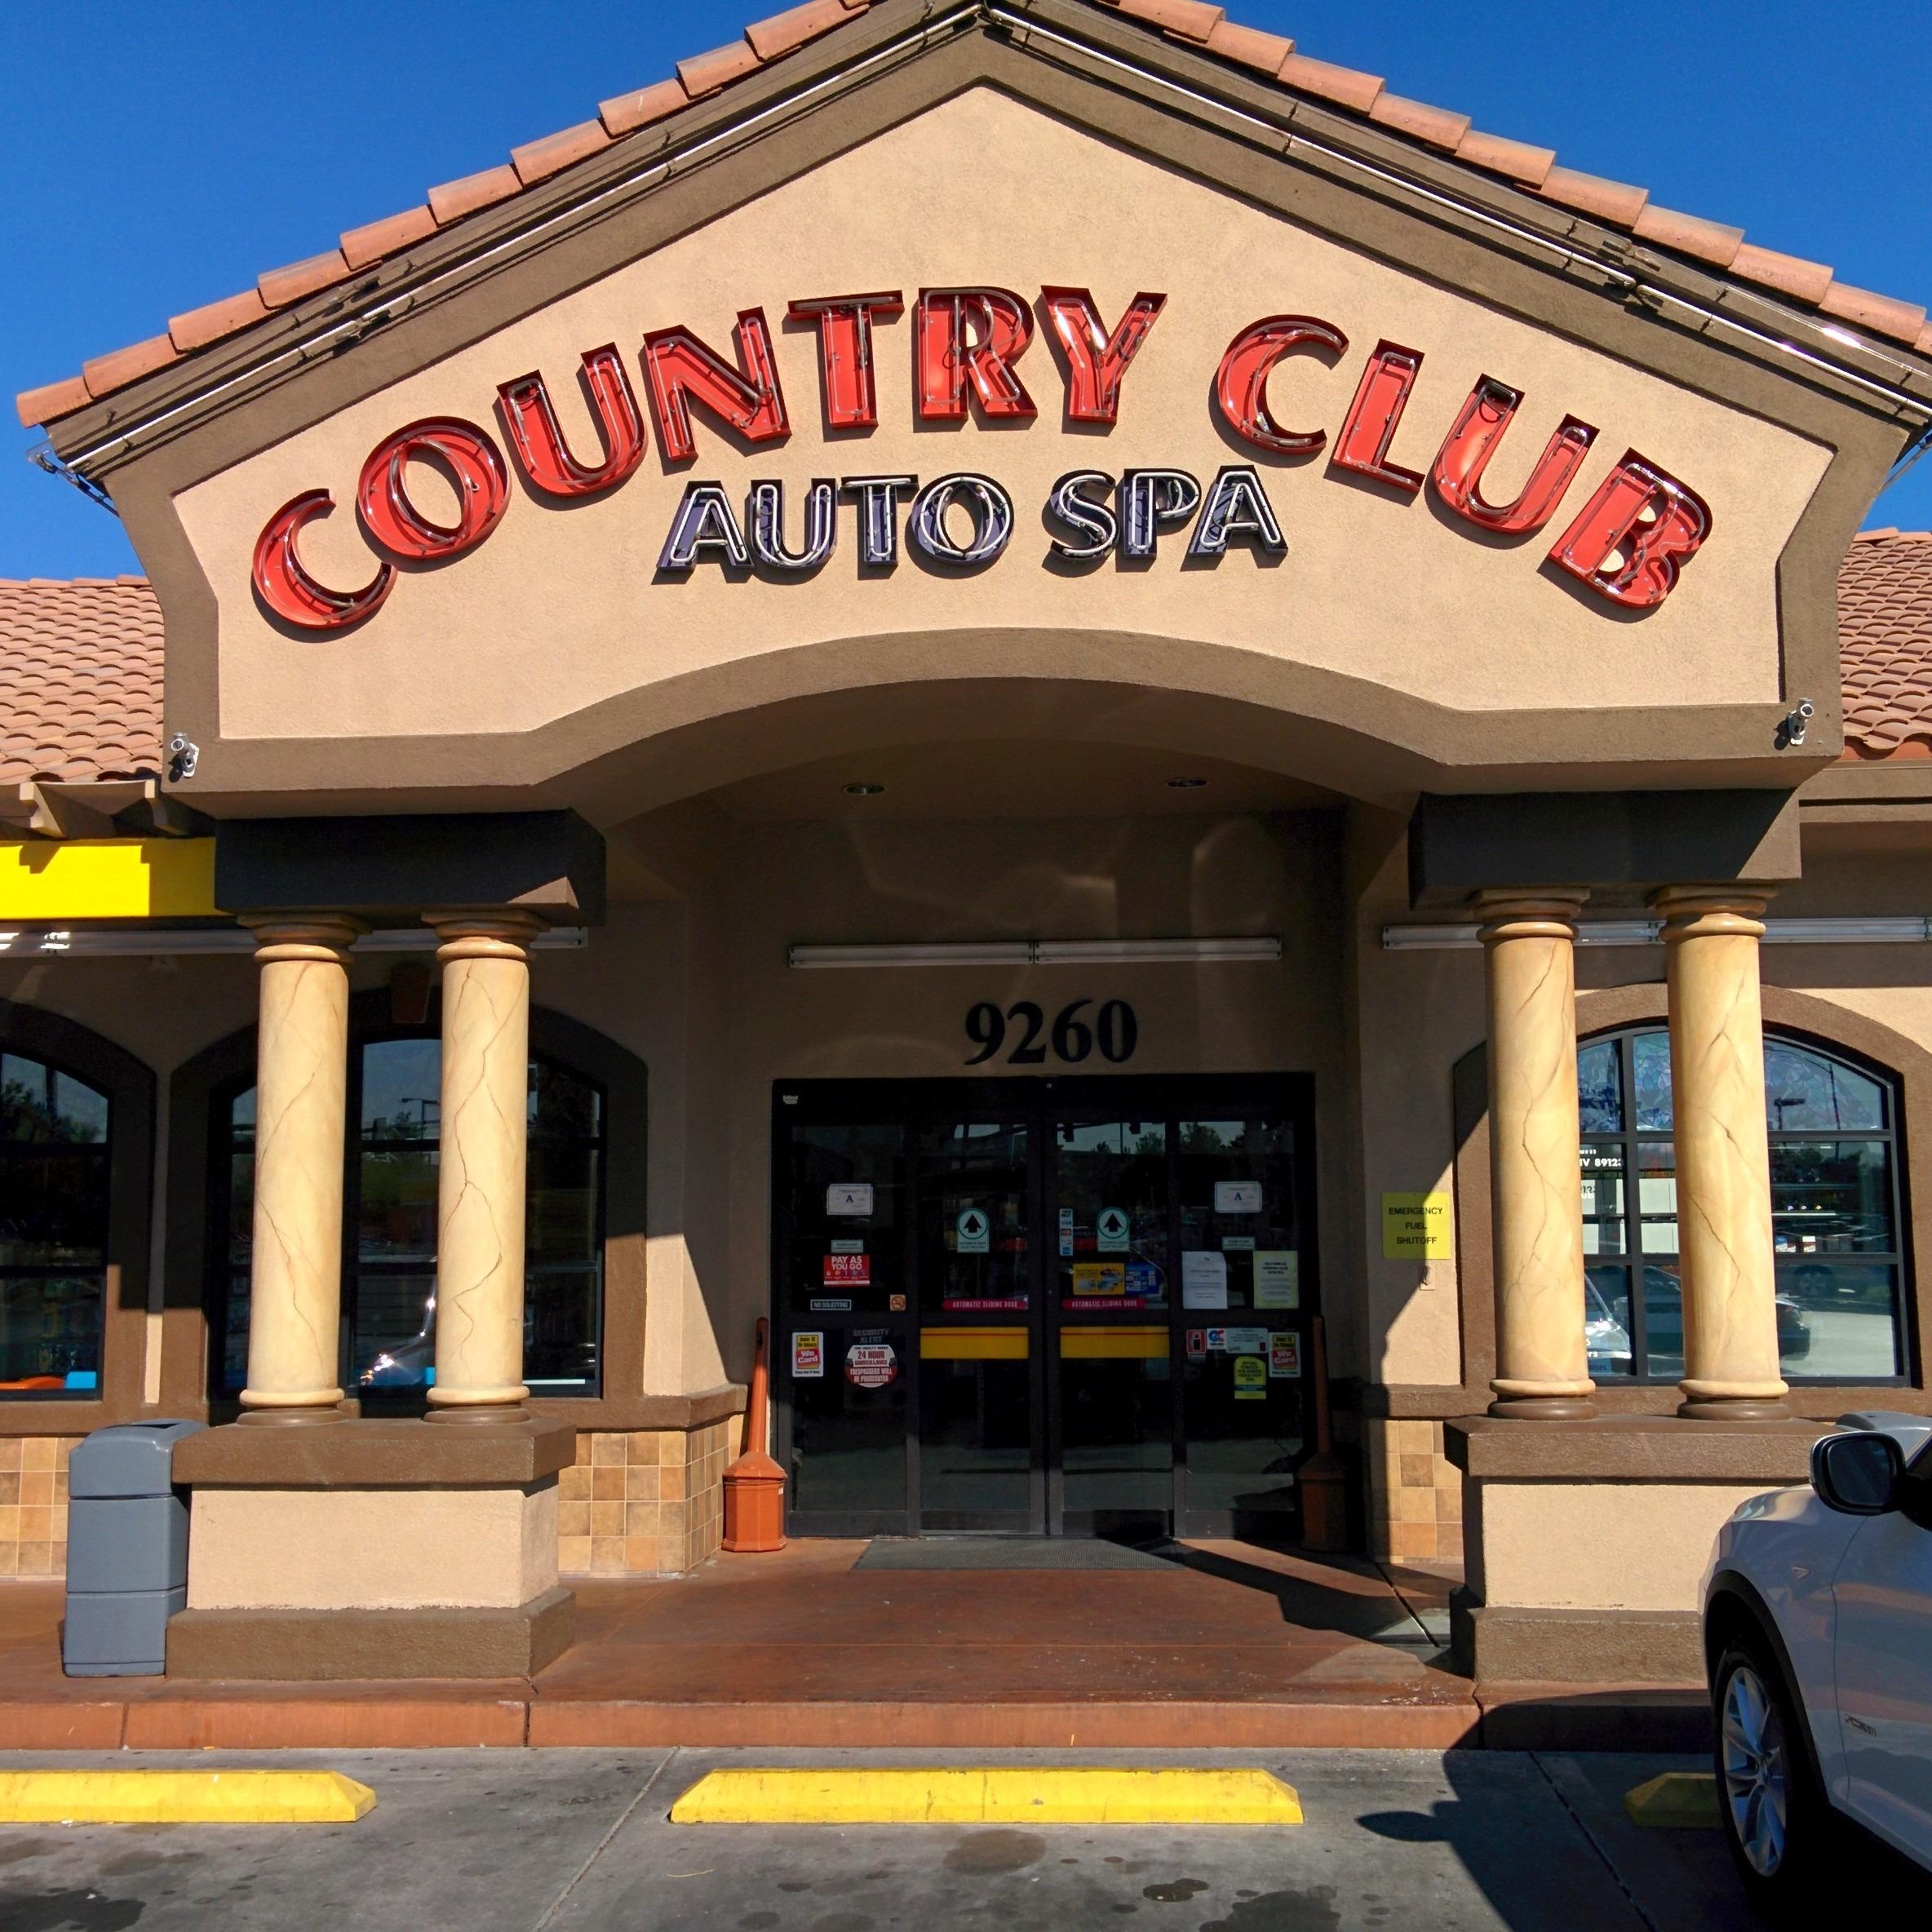 Country Club Auto Spa 9260 S Eastern Ave Las Vegas, NV Gas Stations - MapQuest